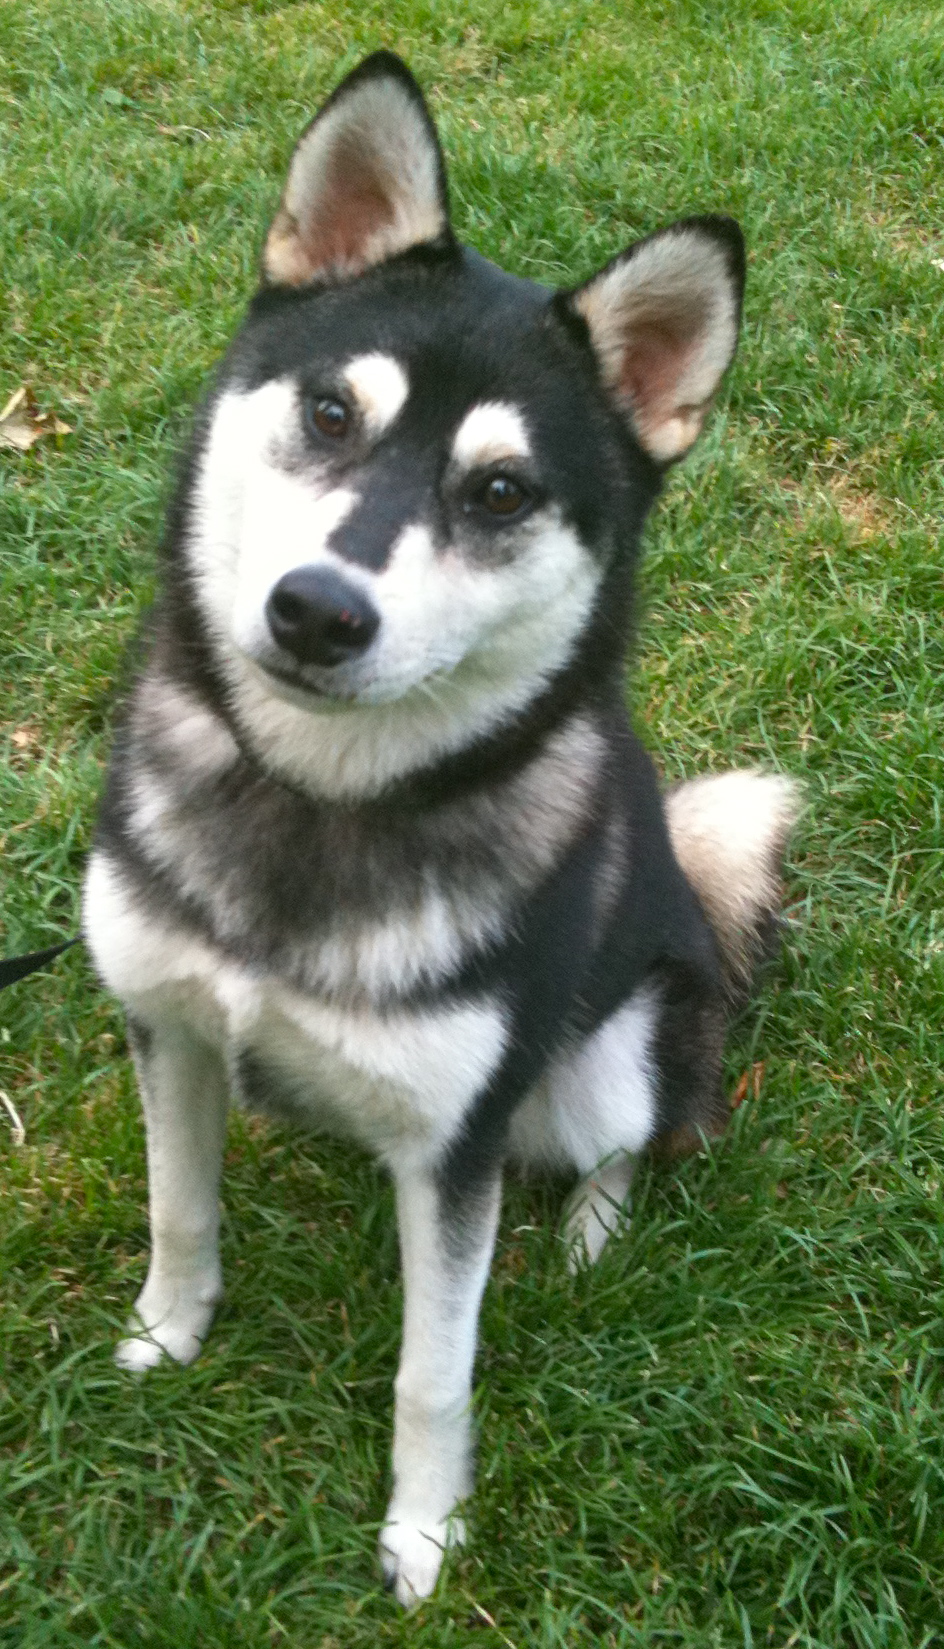 Dog Of The Day Kato The Klee Kai Shiba Inu Mix The Dogs Of San Francisco